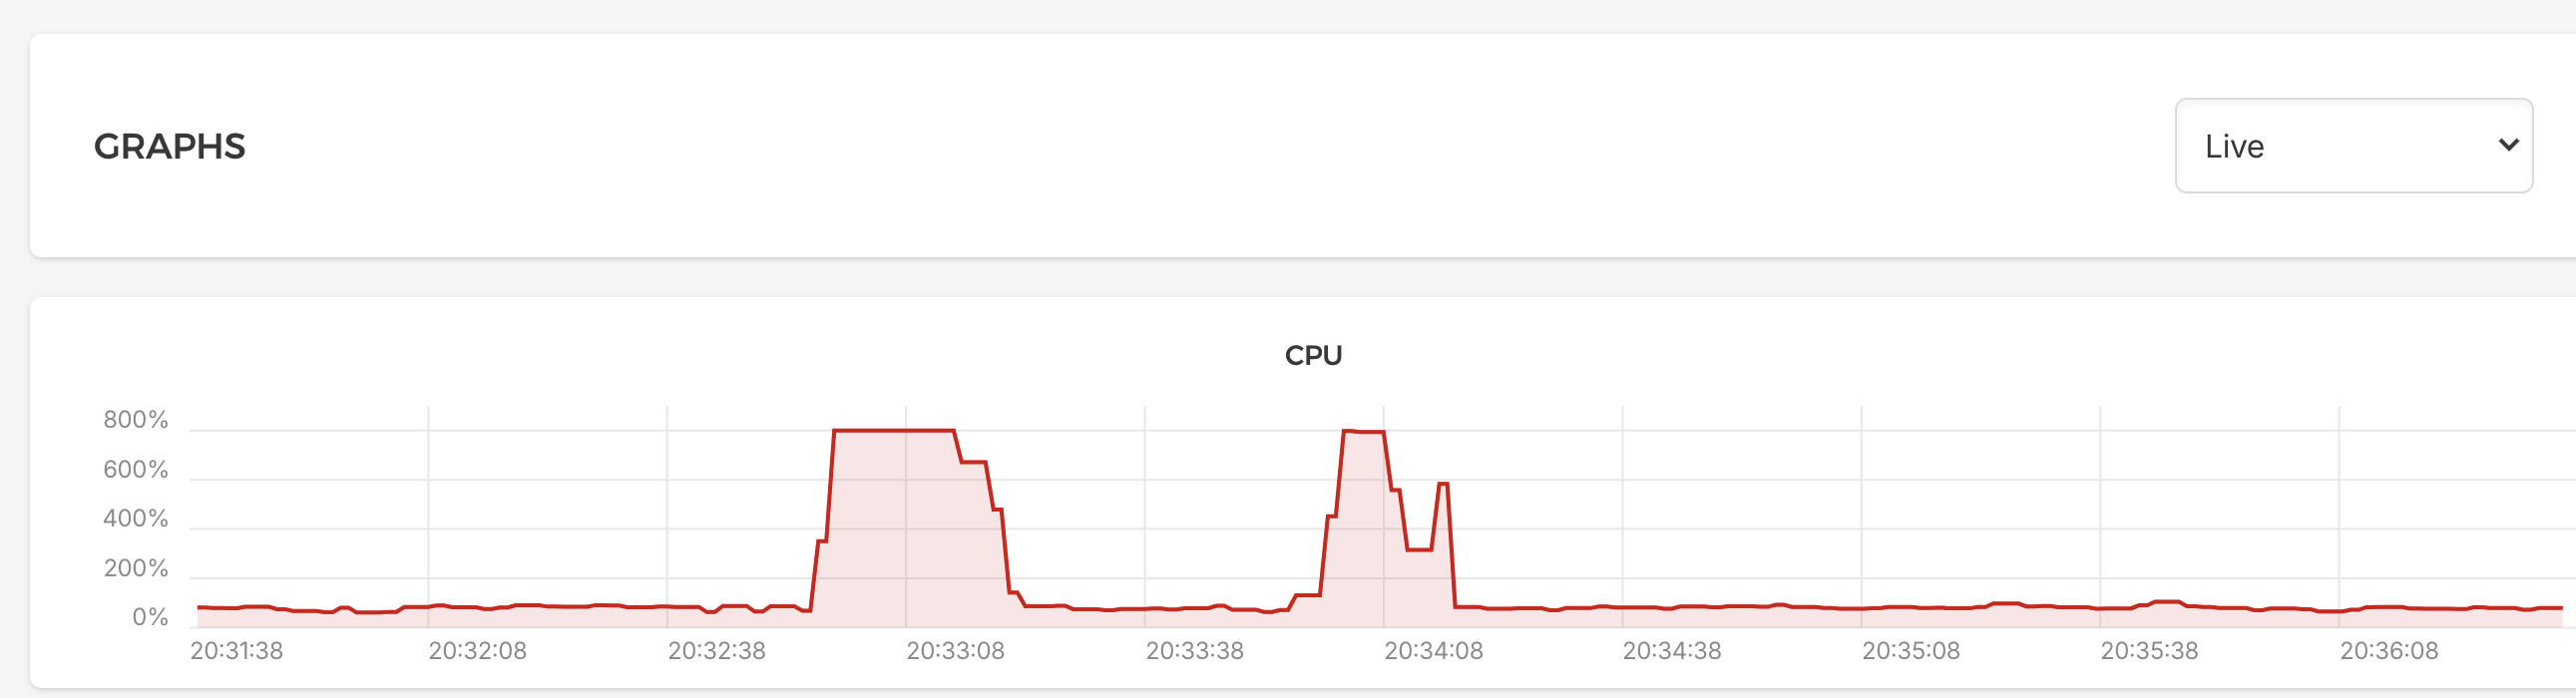 CPU load average on a different chart